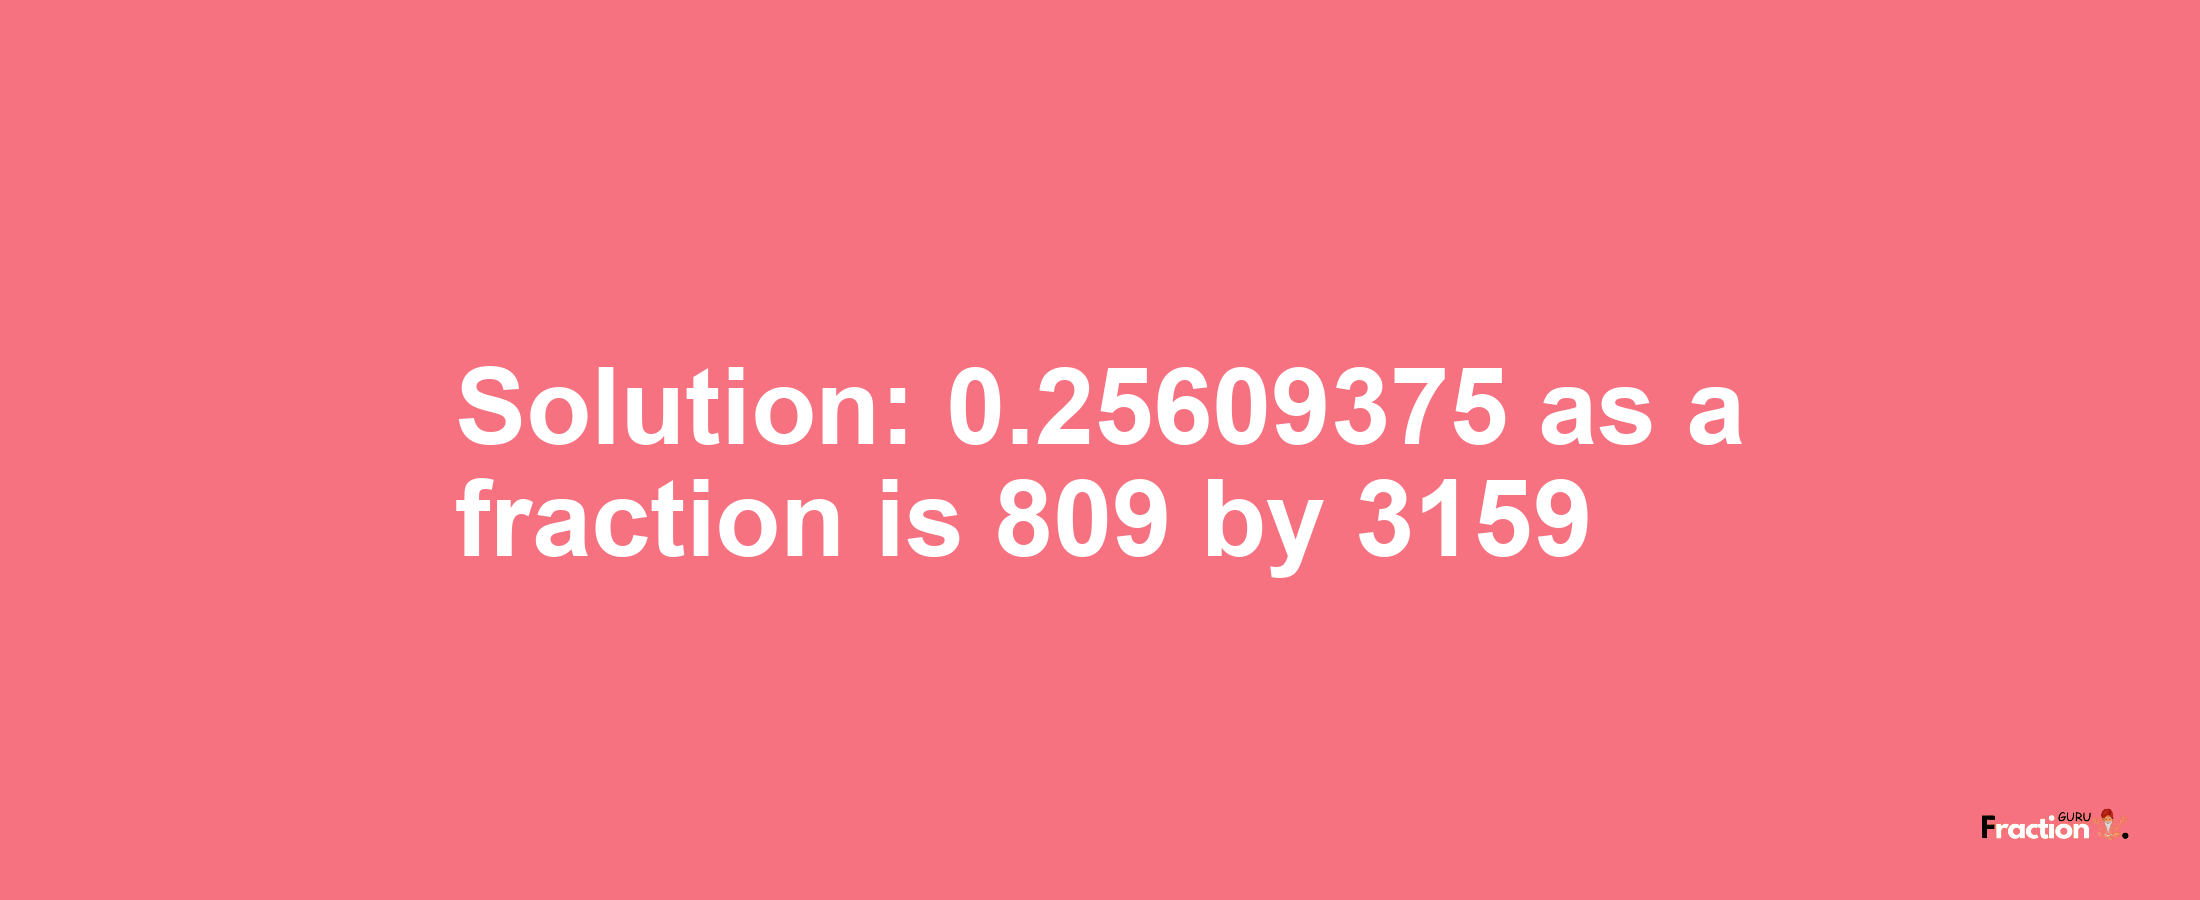 Solution:0.25609375 as a fraction is 809/3159